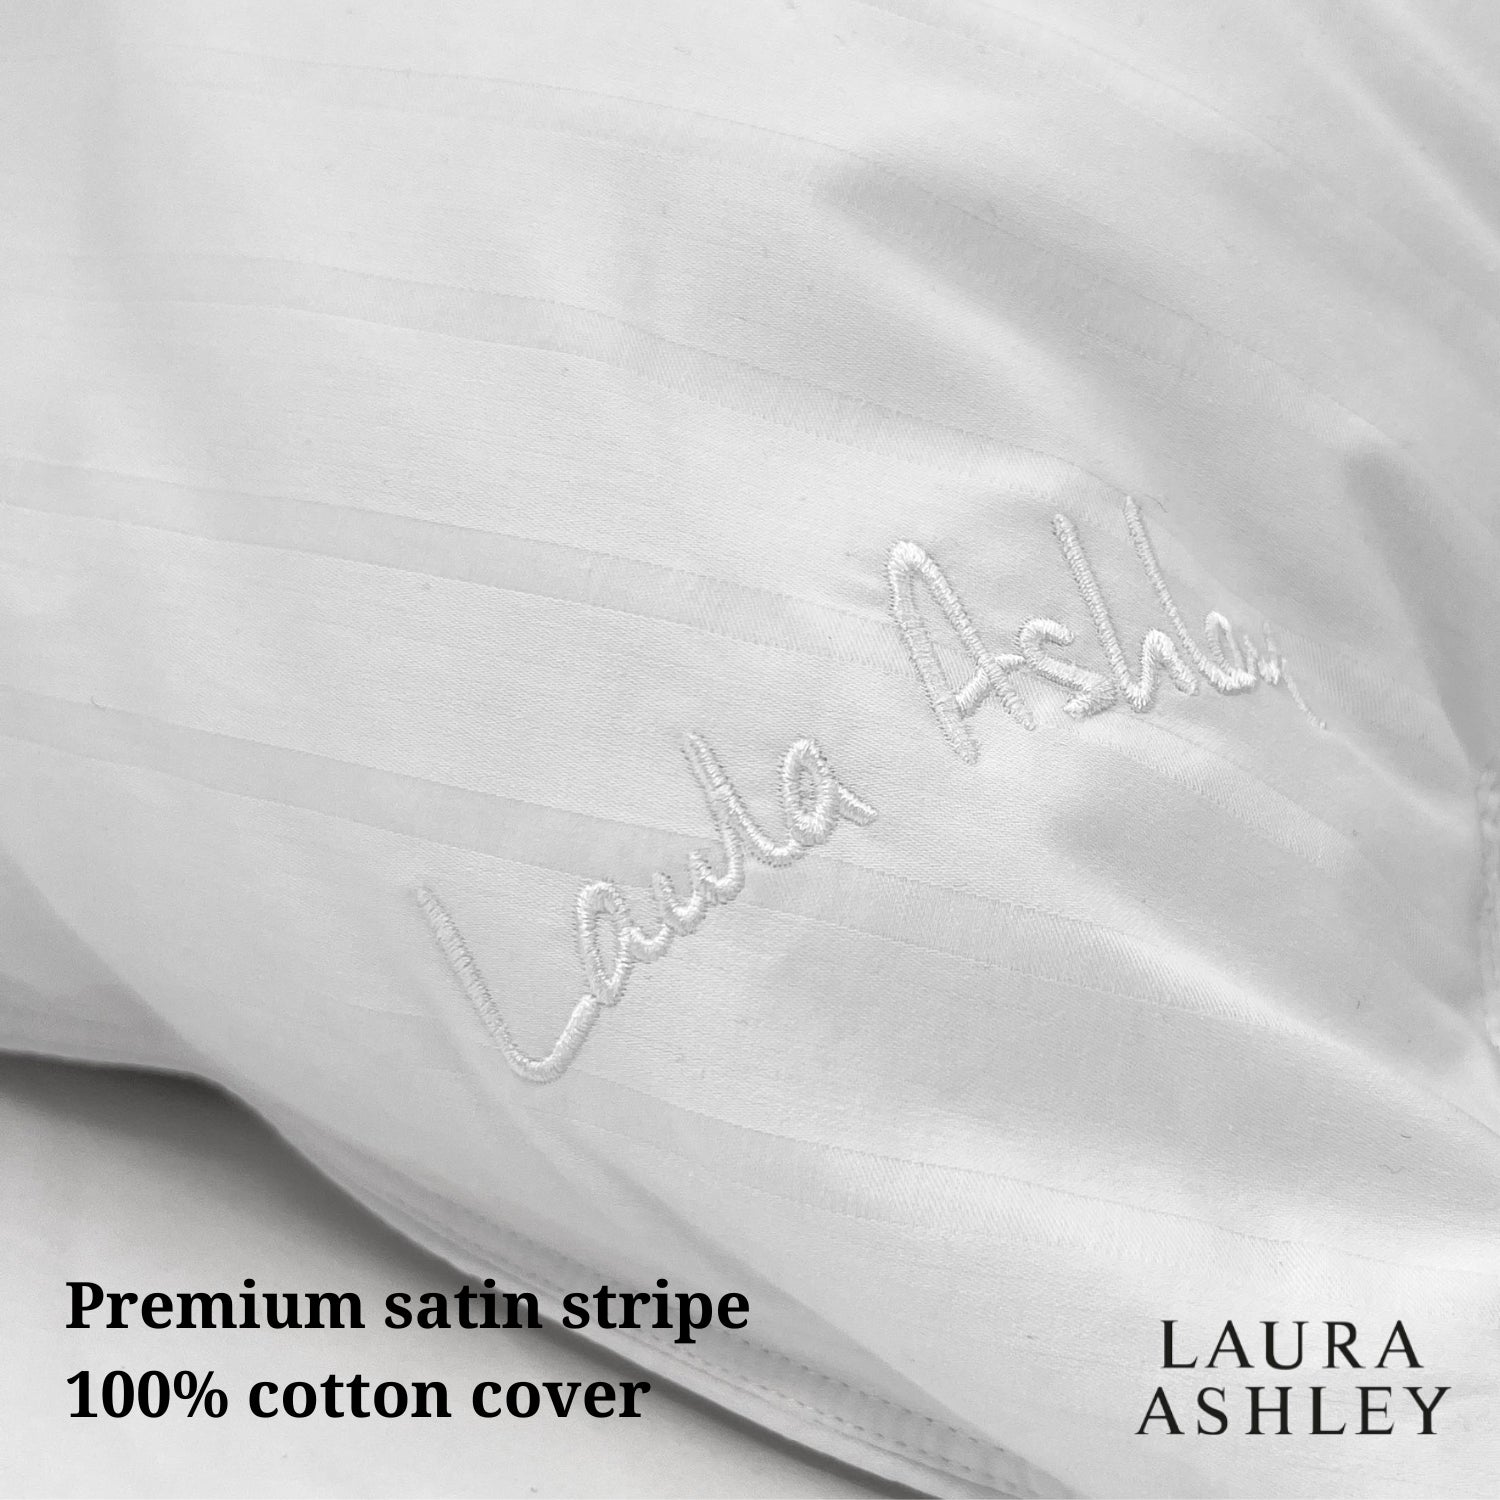 Laura Ashley Luxury Side Sleeper Pillow with luxury satin cover 